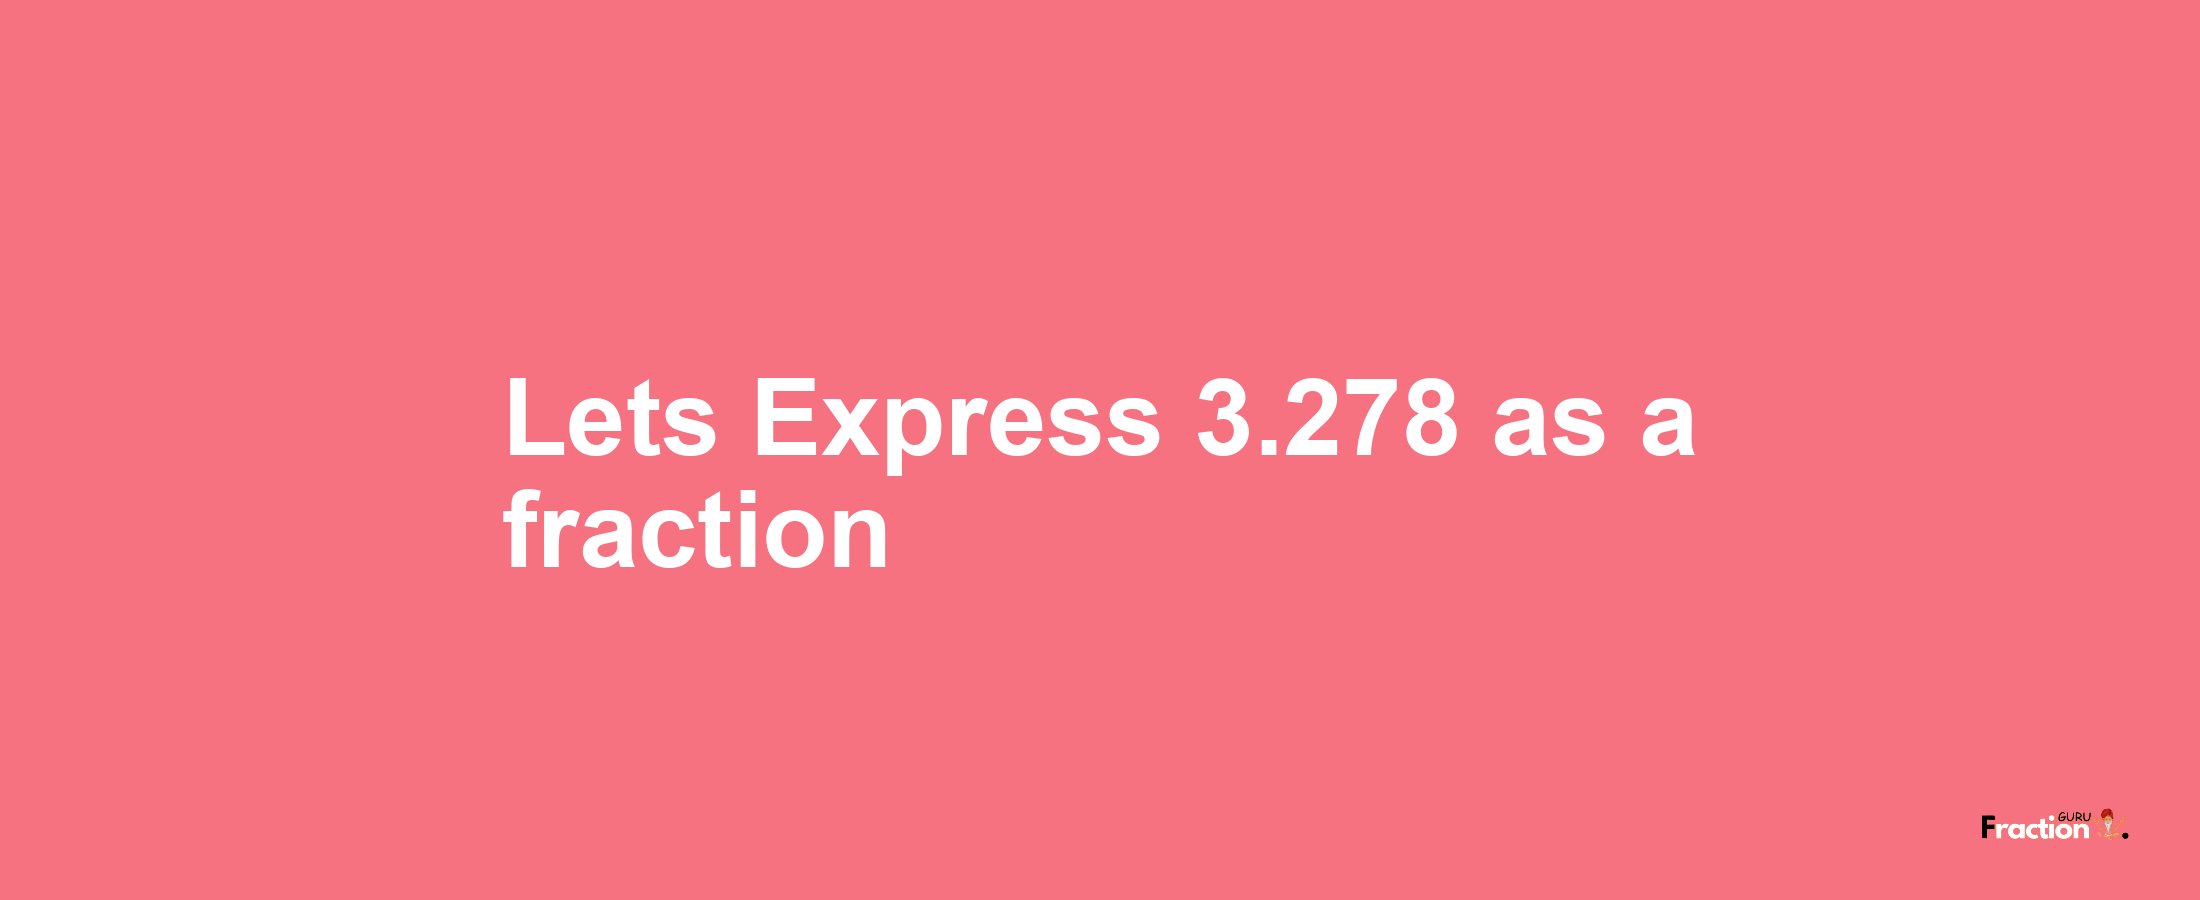 Lets Express 3.278 as afraction